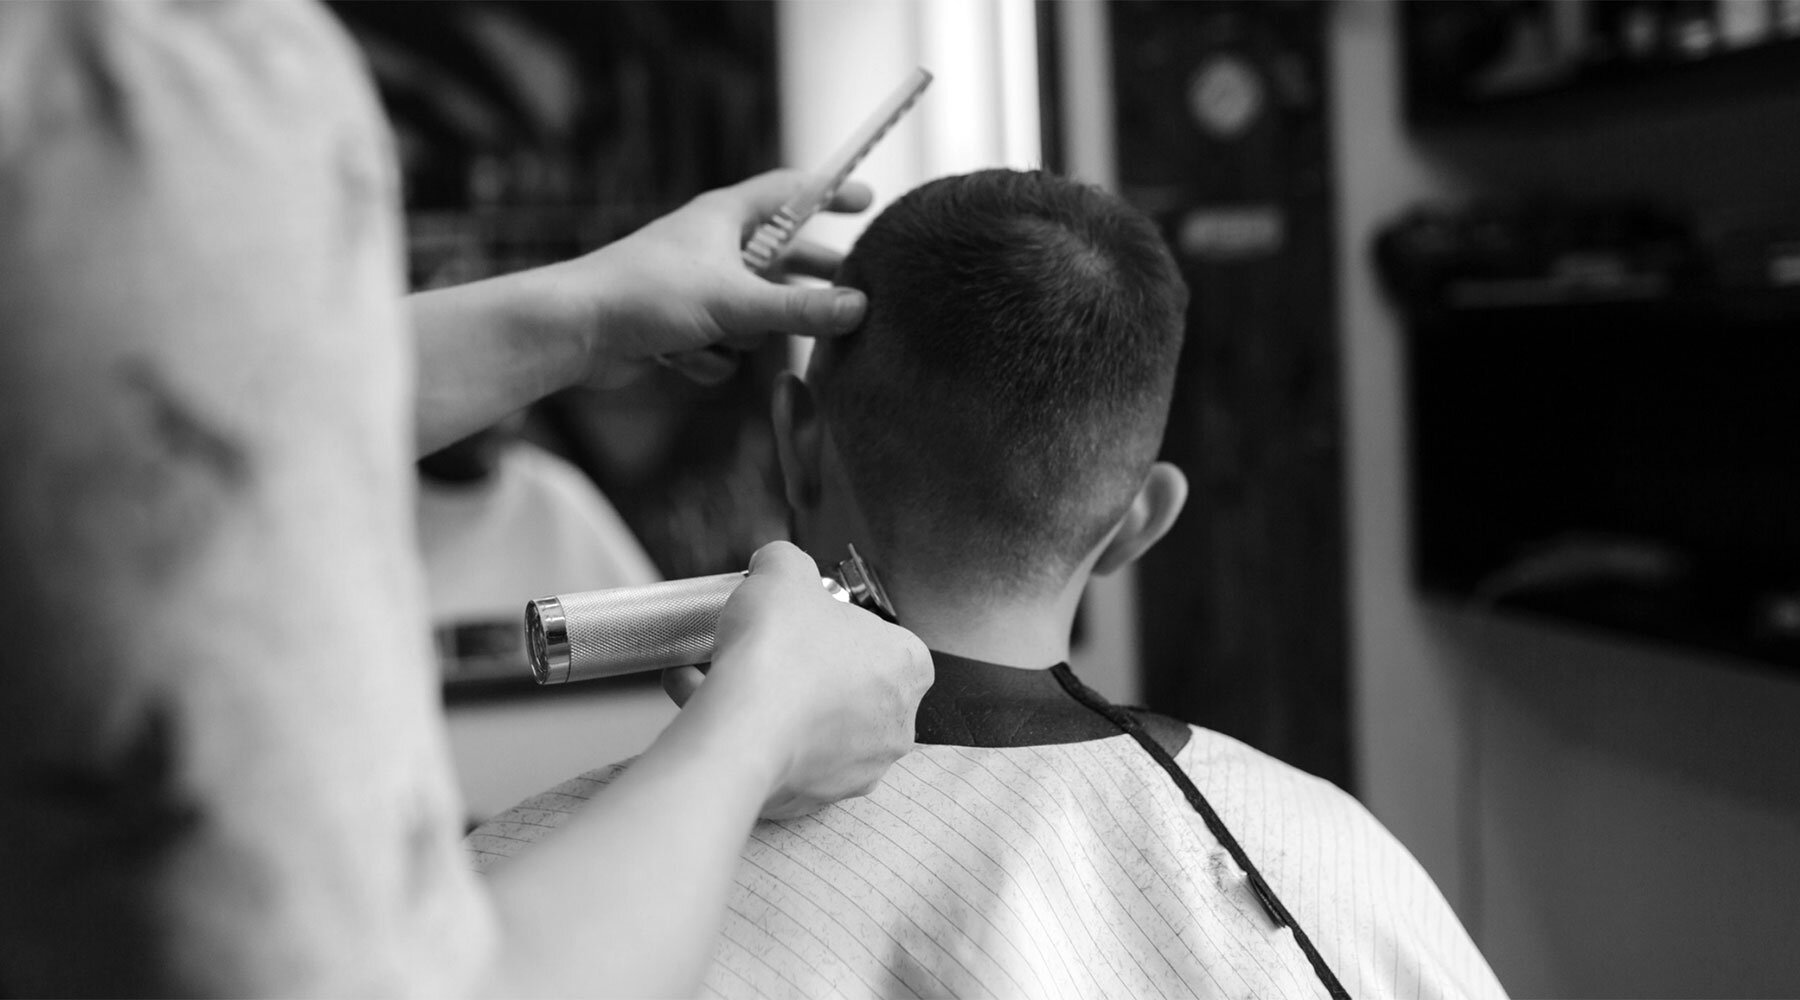 barbering course